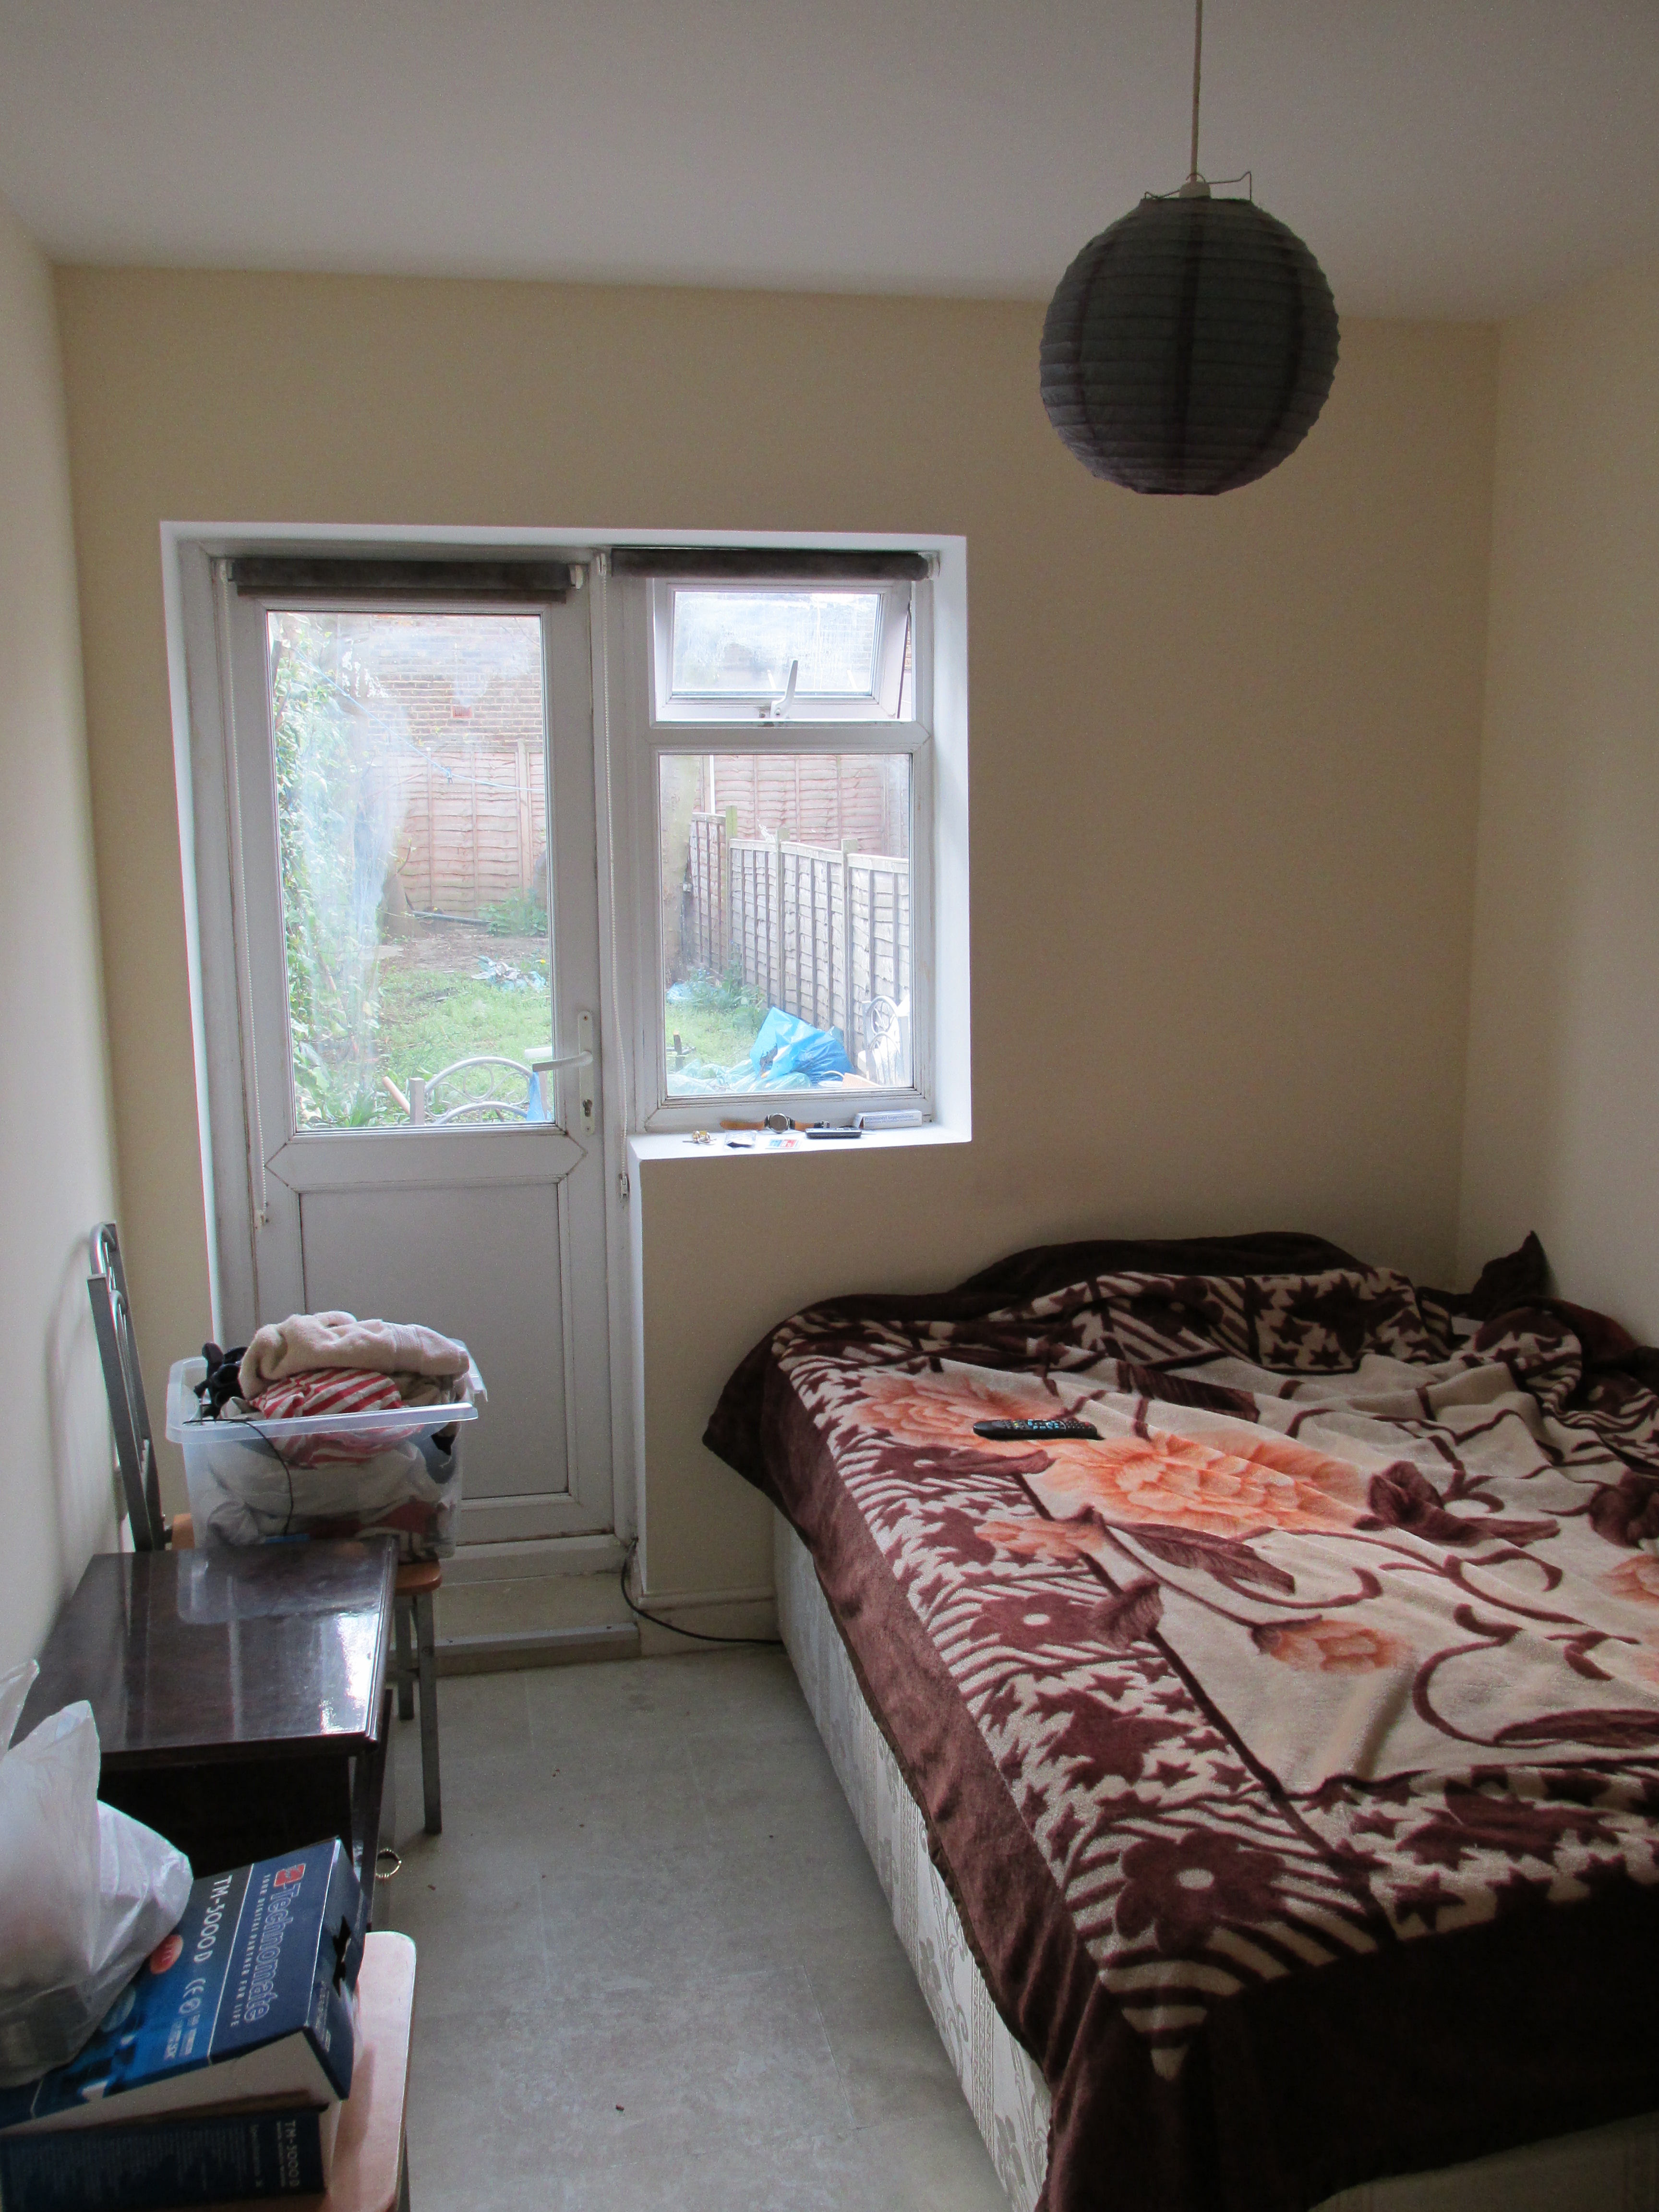 Well located 1bed flat with private garden DSS welcome.